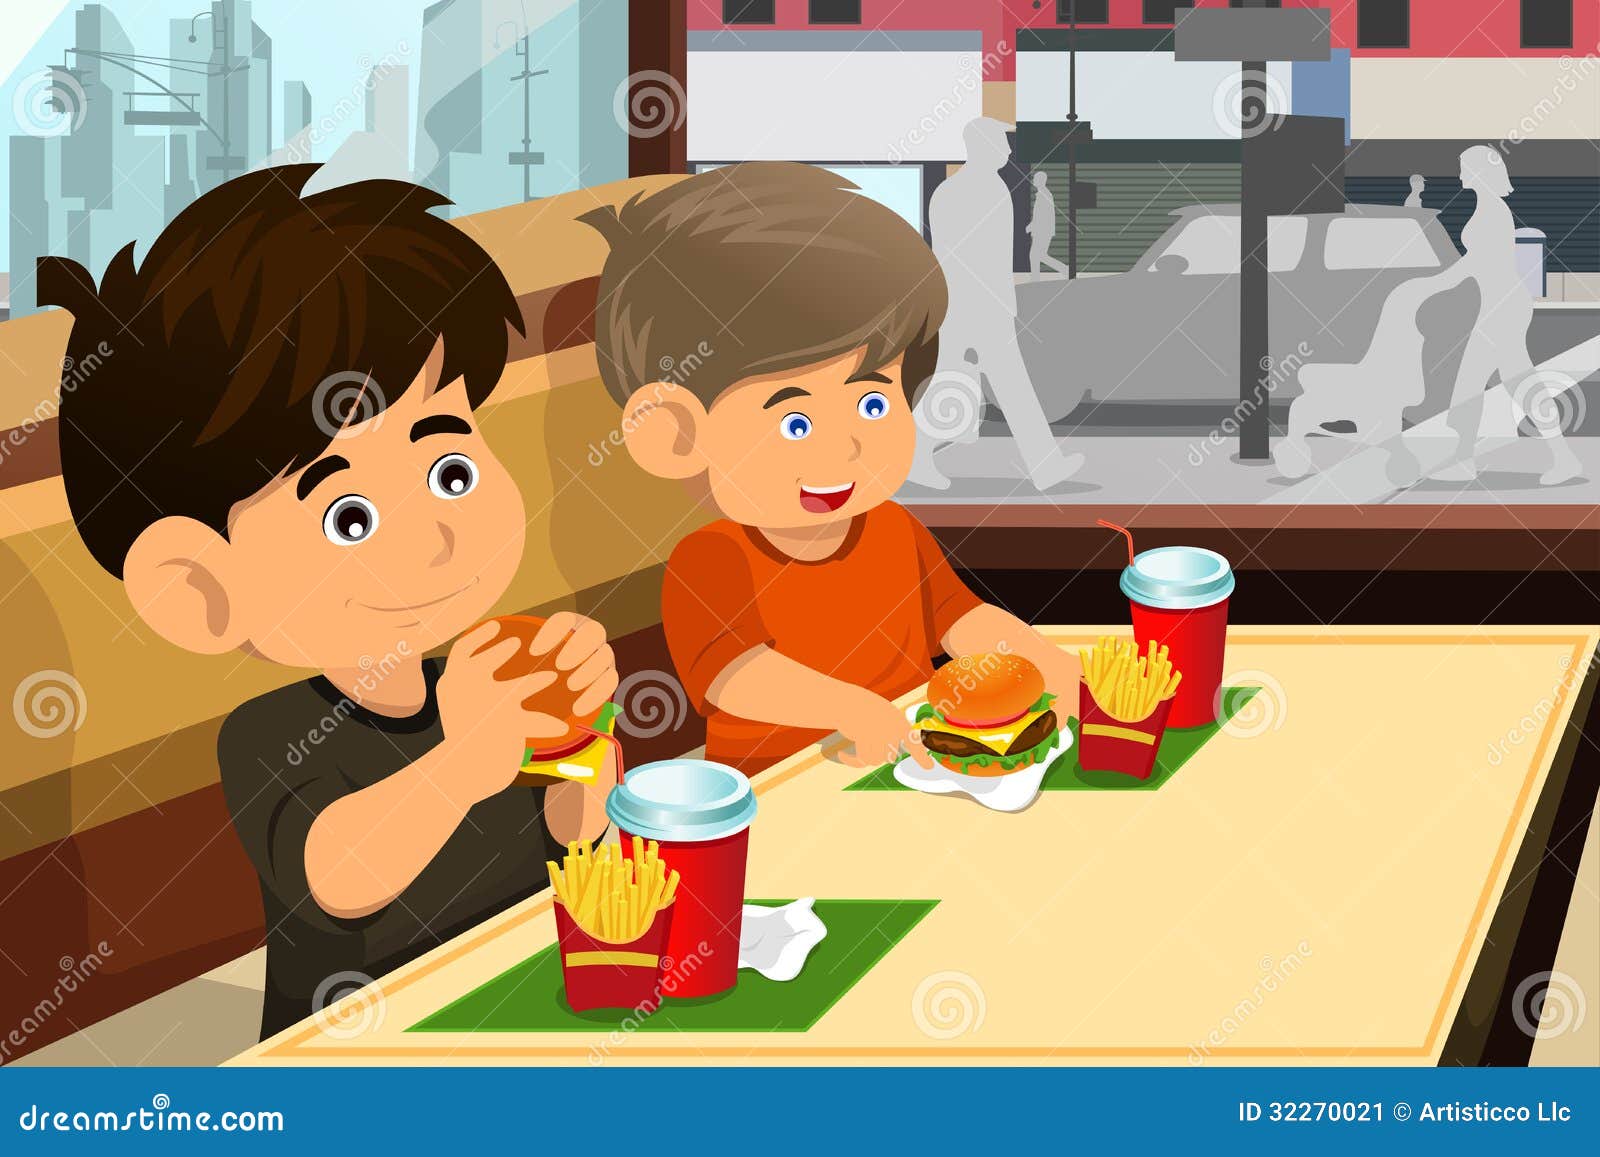 clipart eating in restaurant - photo #25